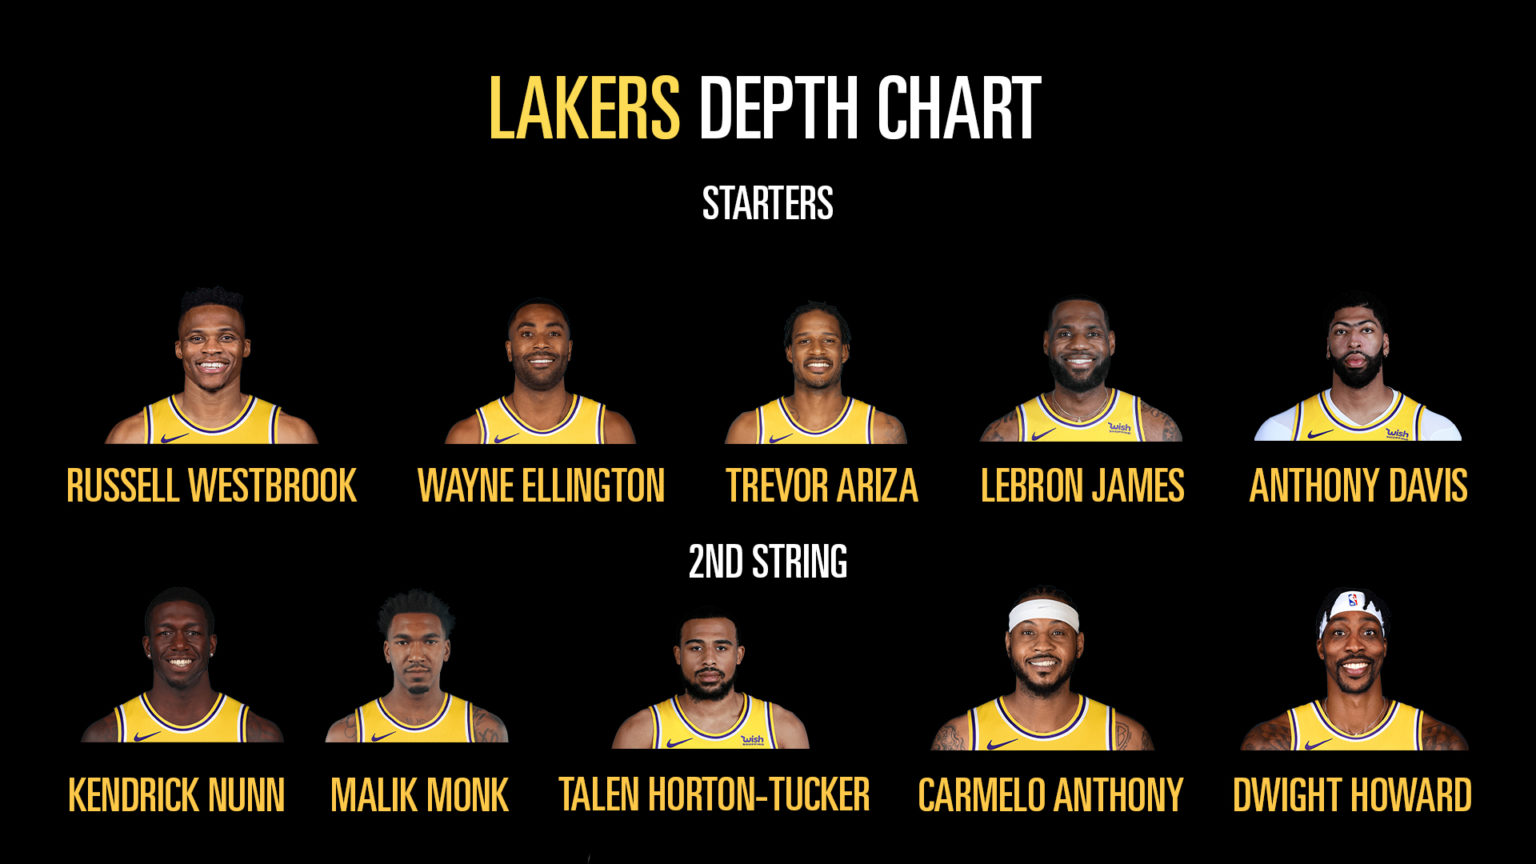 NewLook Depth Charts for Every NBA Team (202122)